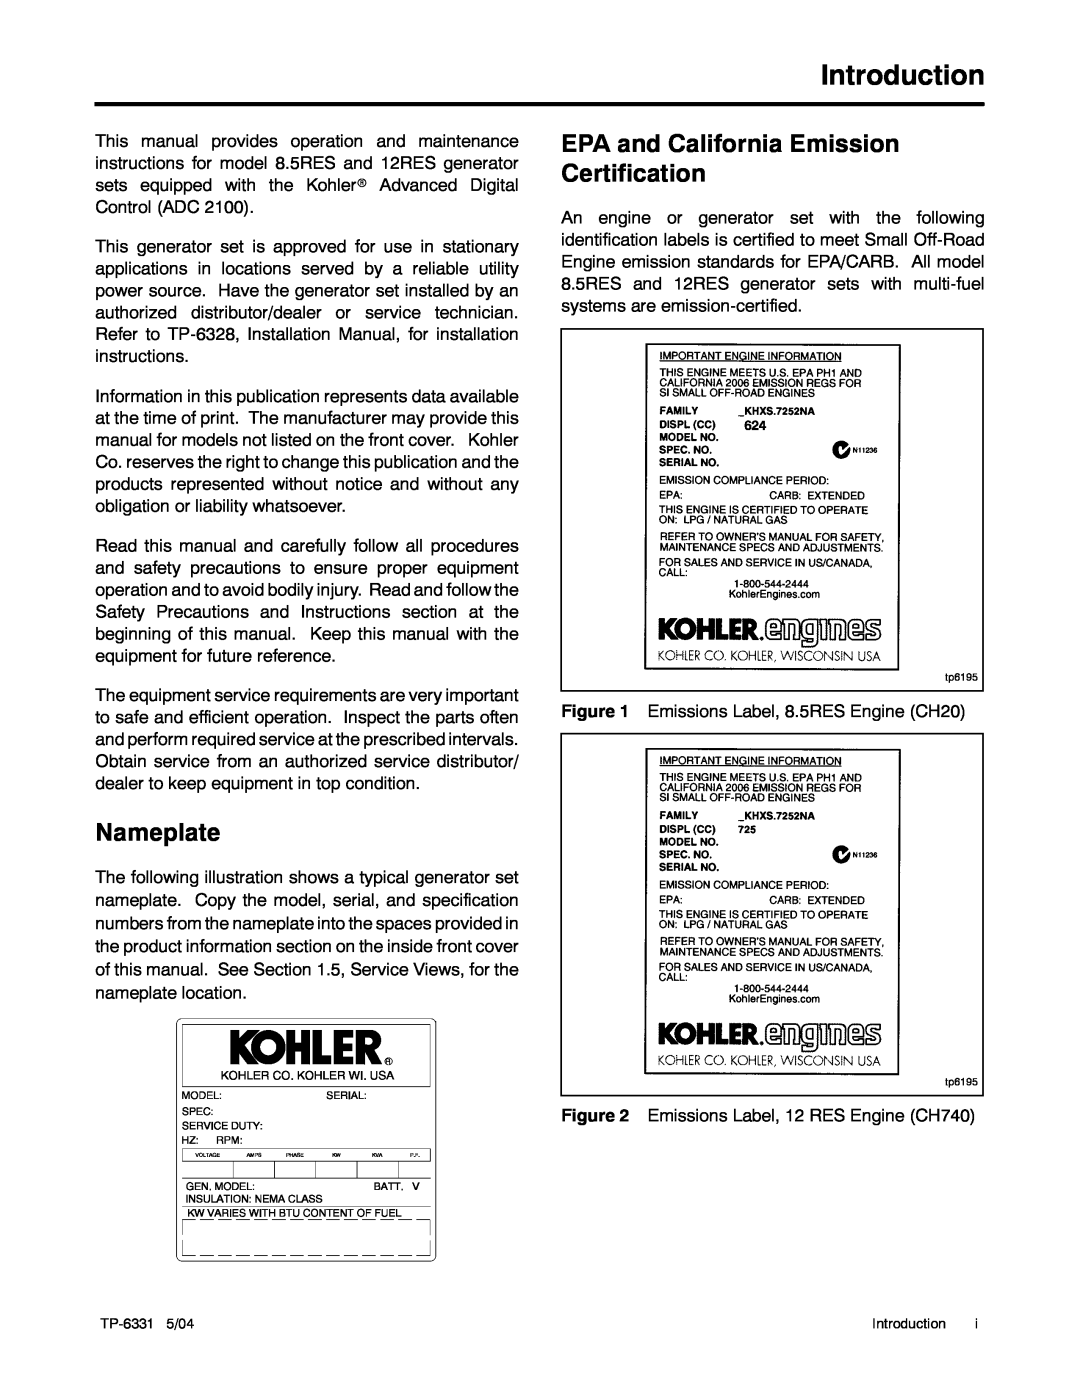 Kohler 12RES, 8.5RES manual Introduction, Nameplate, EPA and California Emission Certification 